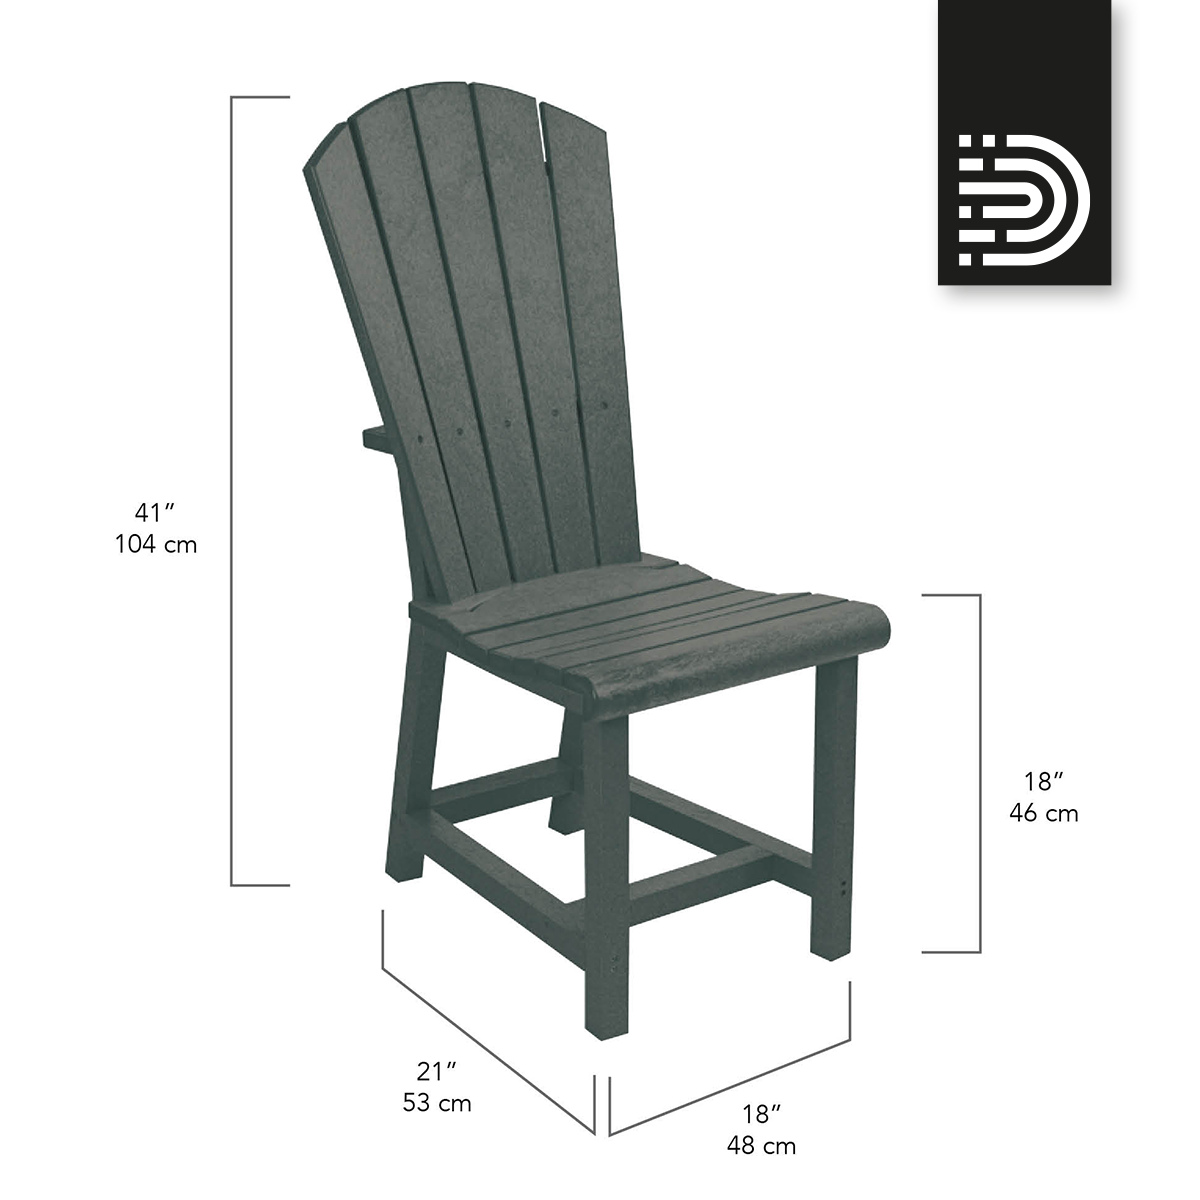 C11 Addy Dining Side Chair - white 02 